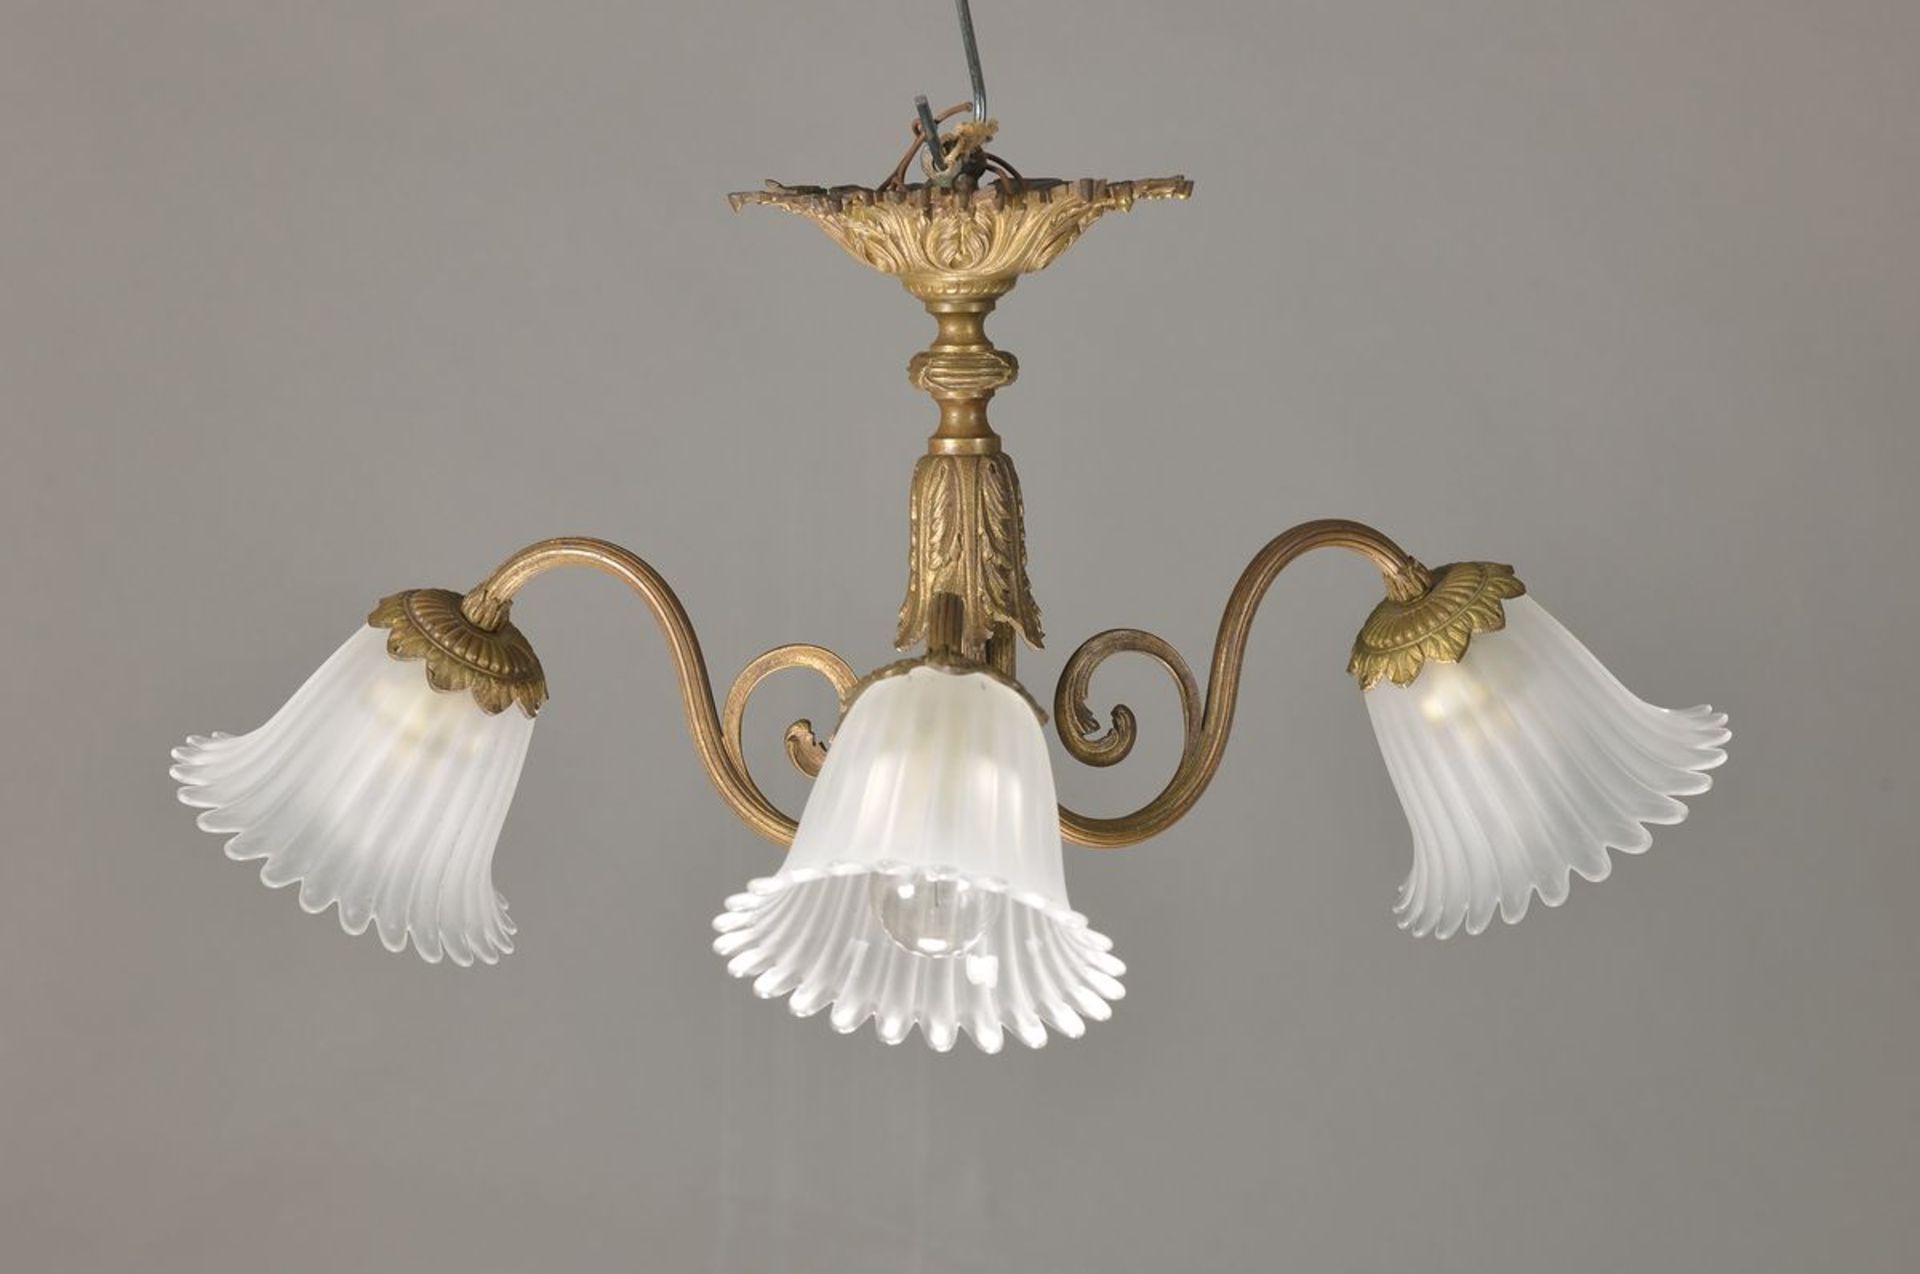 Ceiling lamp, France, around 1890, bronze casing with acanthus decoration, three focal points,